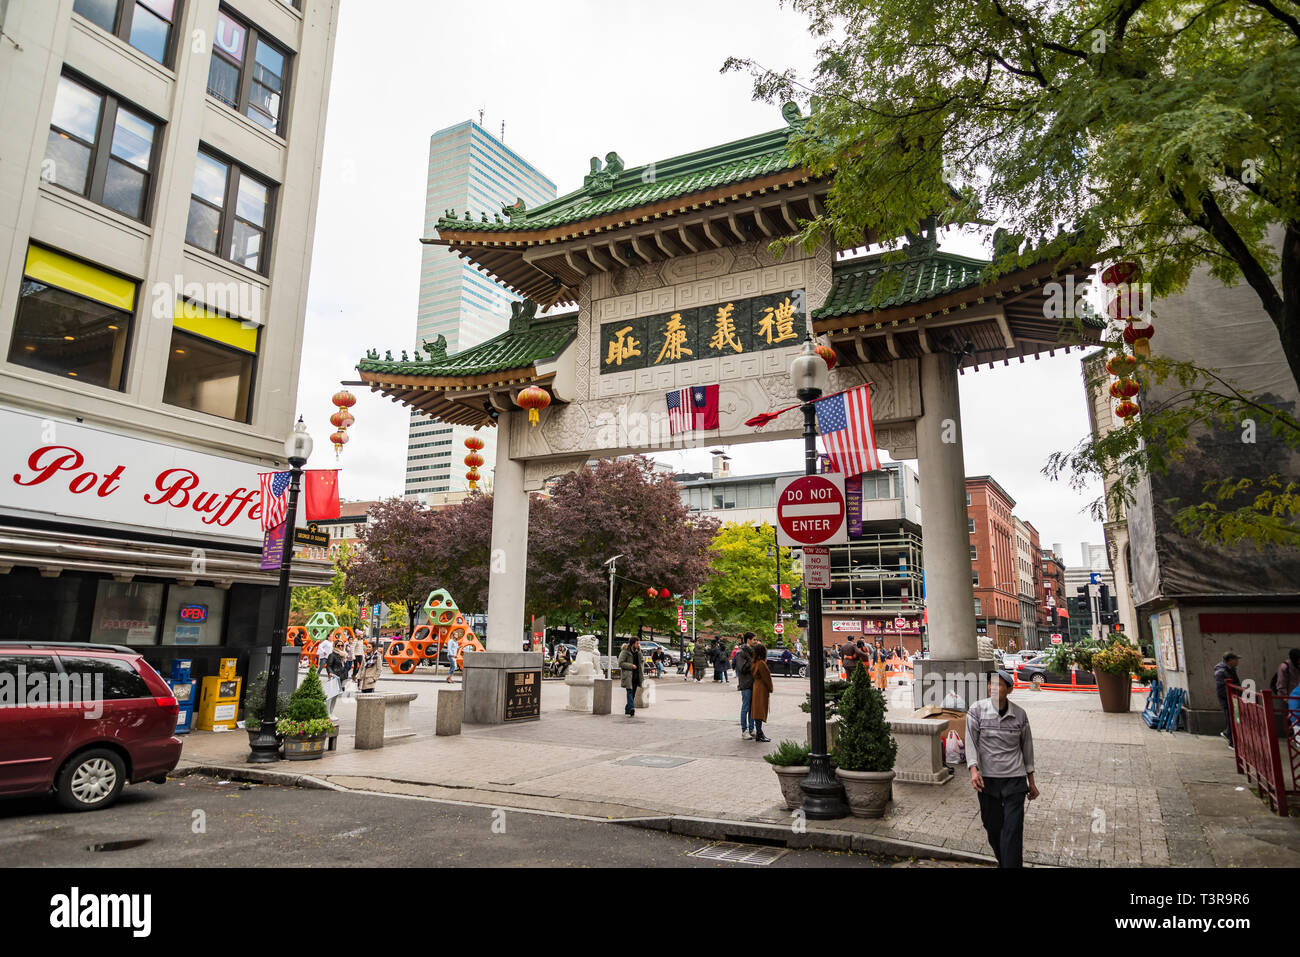 Boston's Chinatown is the only surviving Chinatown district in New England region of United States. Stock Photo